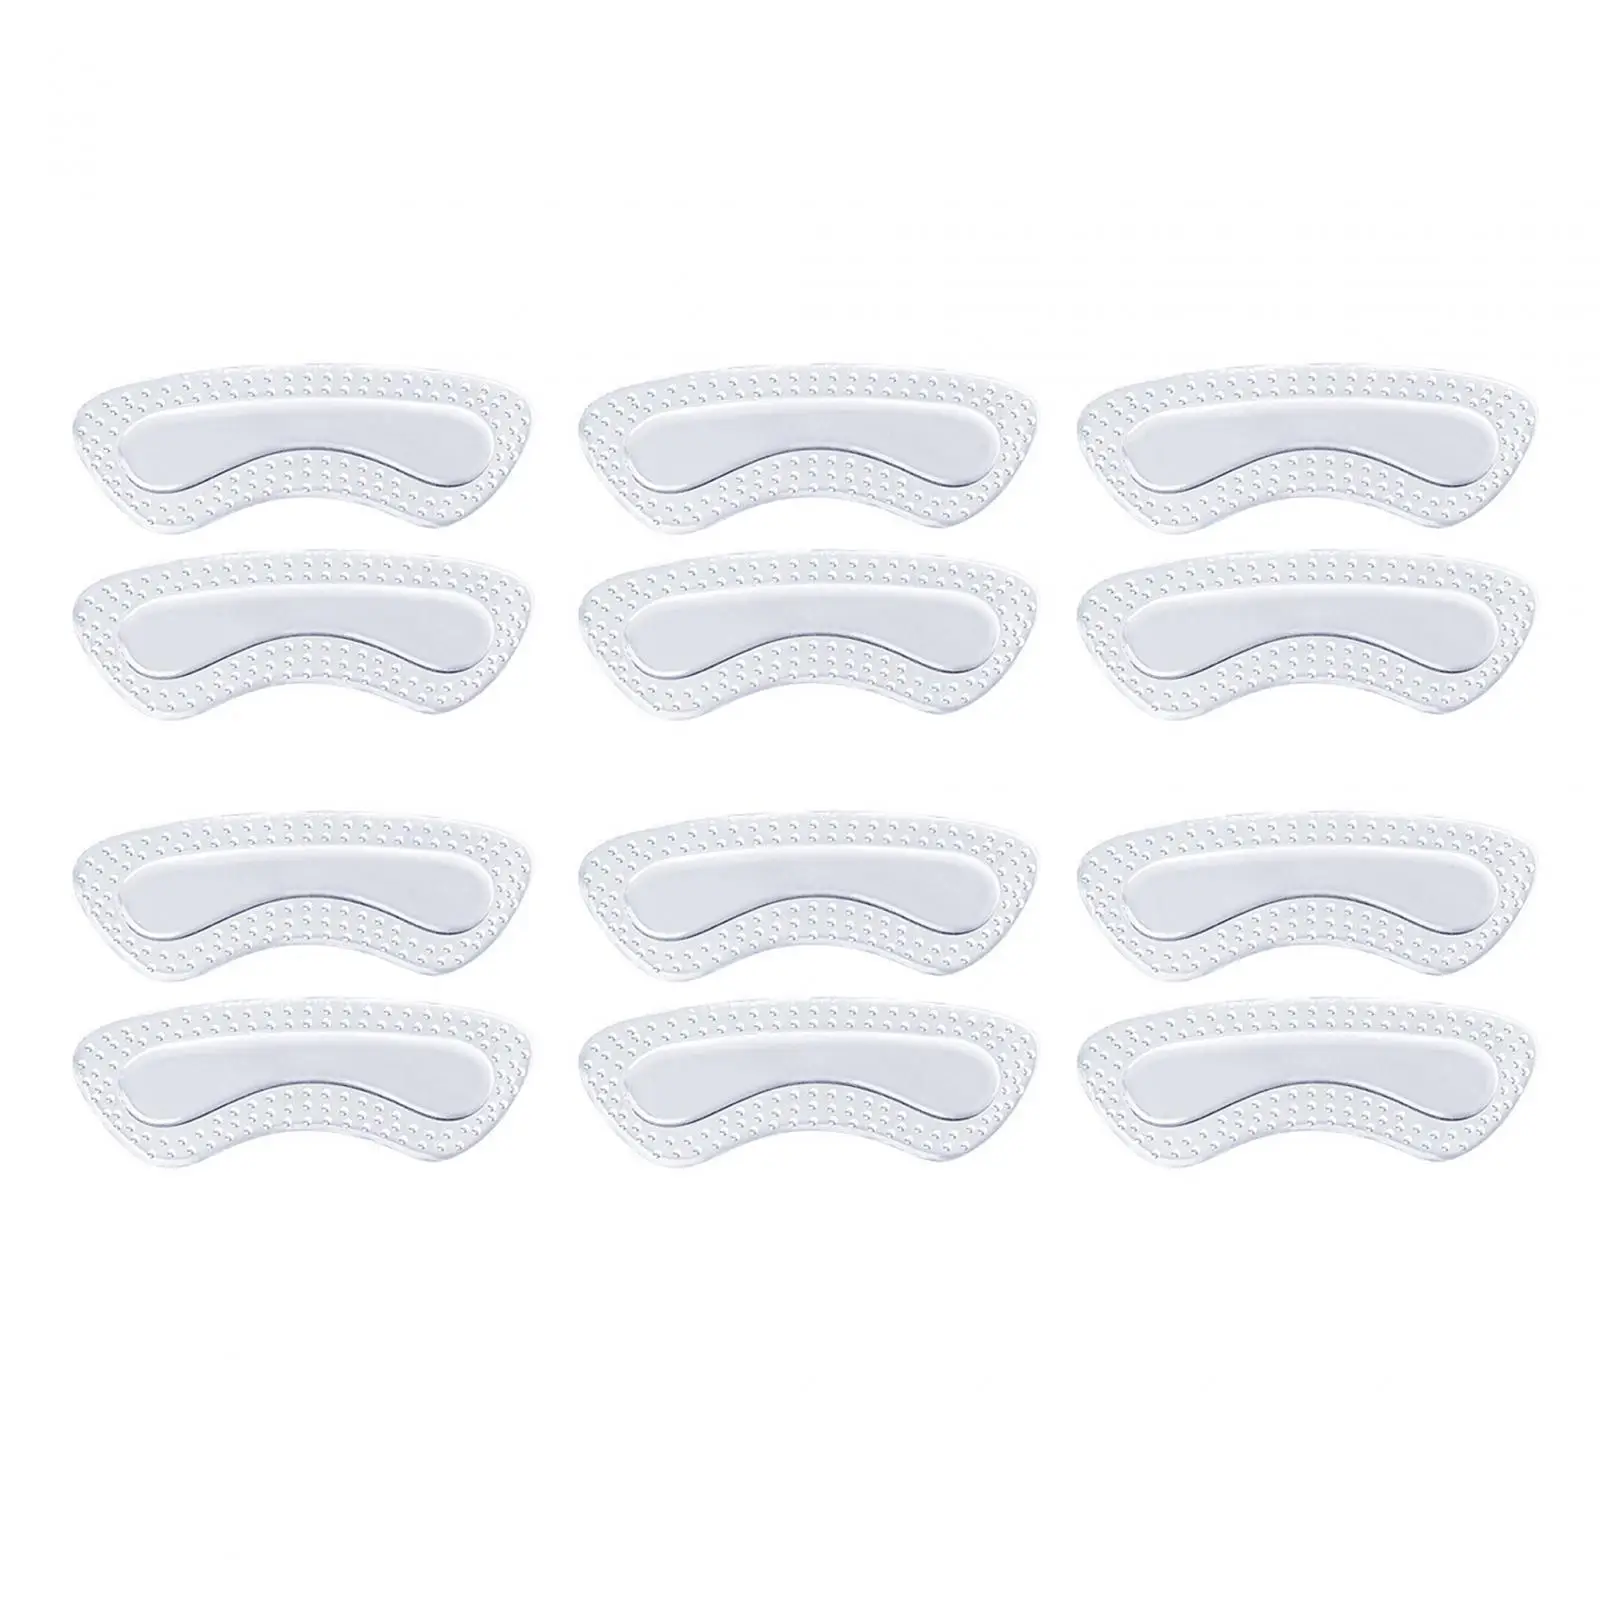 12x Back Heel Inserts Insoles Breathable Foot Care Shoe Pads Cushion Liner Grips Heel Protector for Women Men Running Shoes